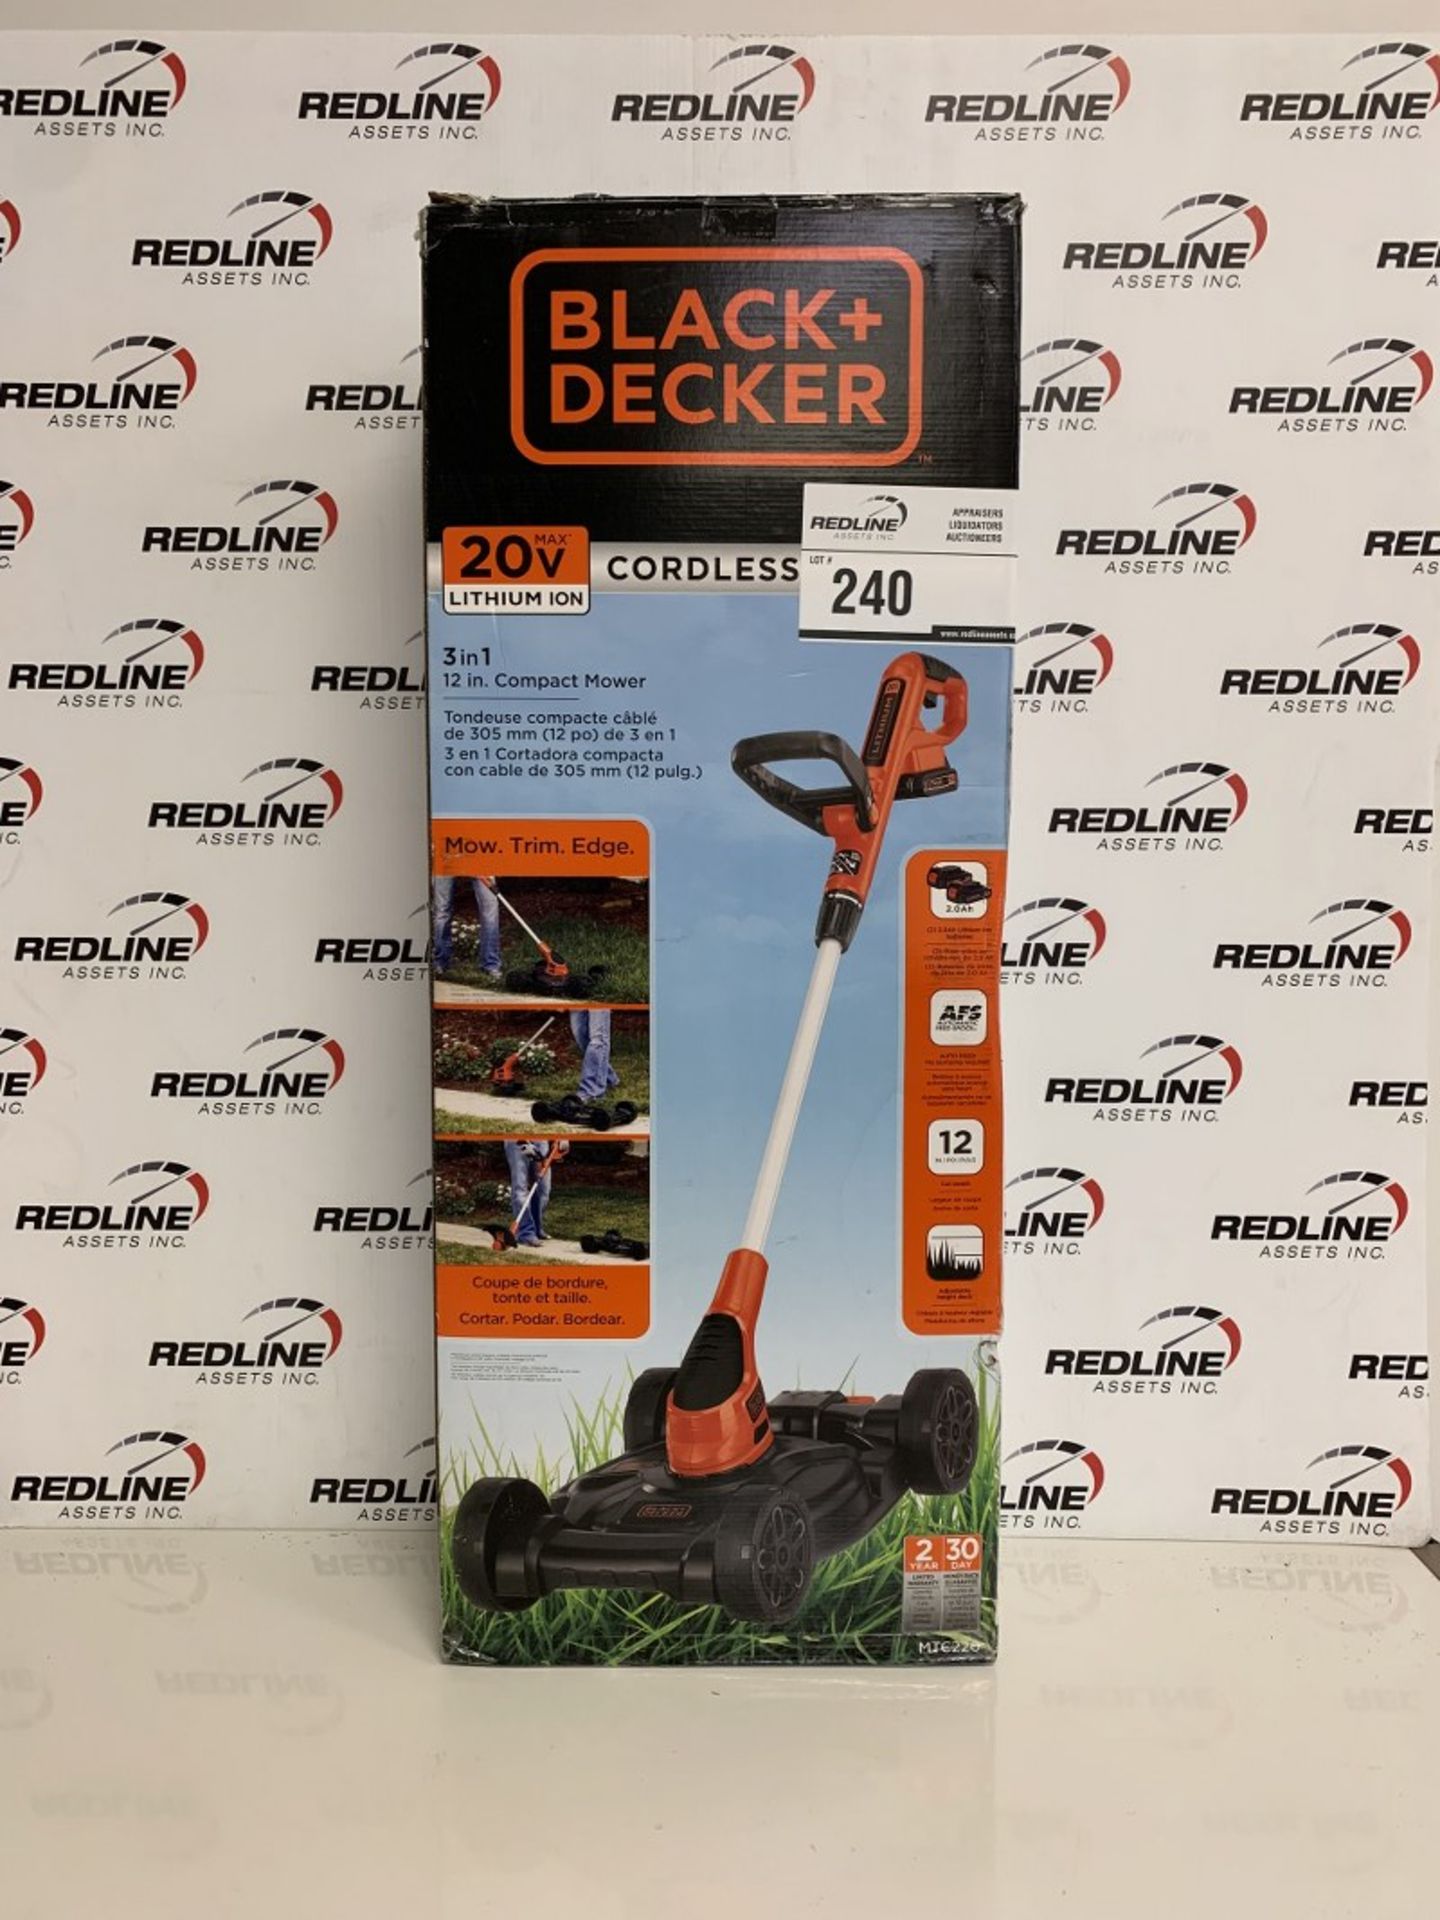 Black And Decker - 20V 3 In 1 - 12 Inch Compact Mower